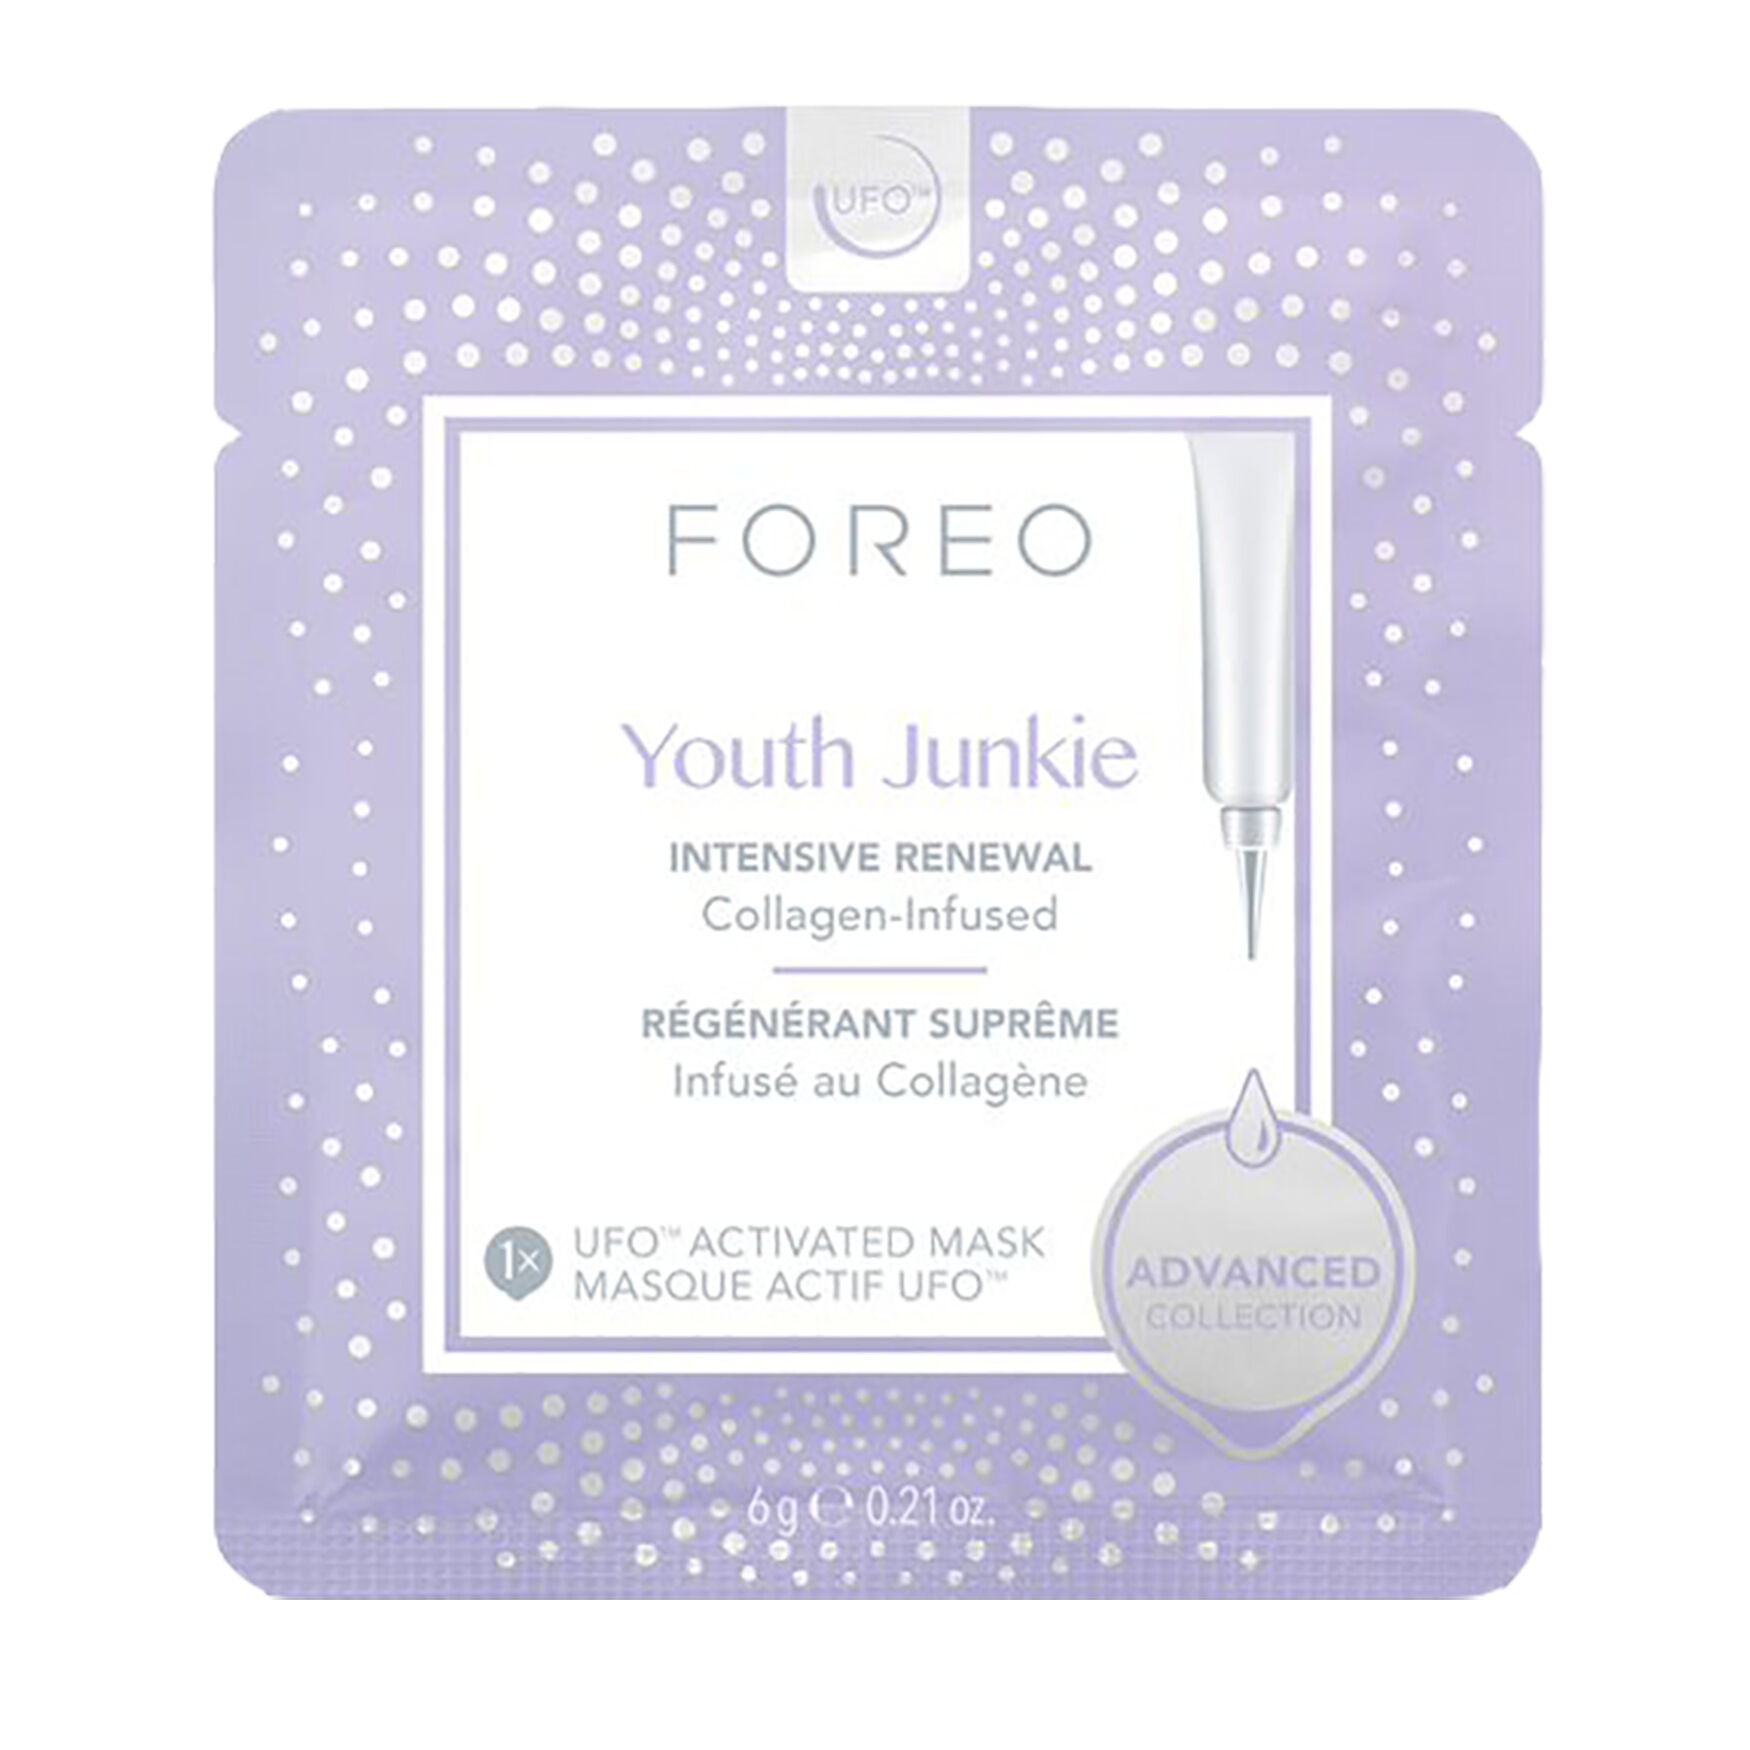 FOREO - Youth Junkie UFO-Activated Masks by Foreo